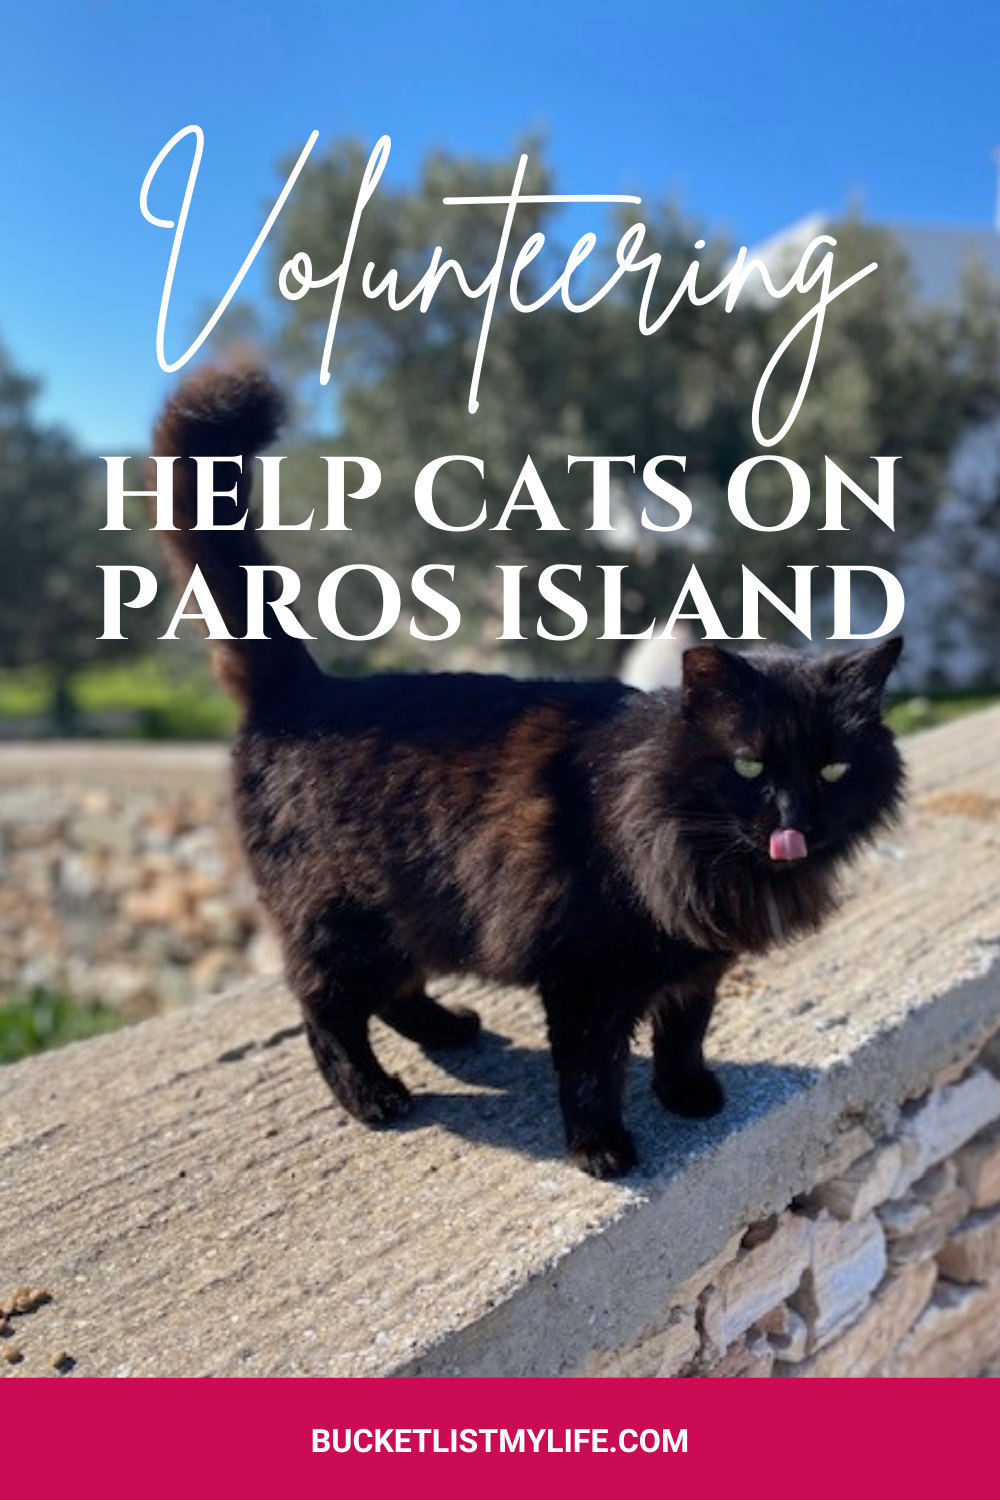 This Is What Volunteering With Cats on Paros Looks Like (#Love😍)